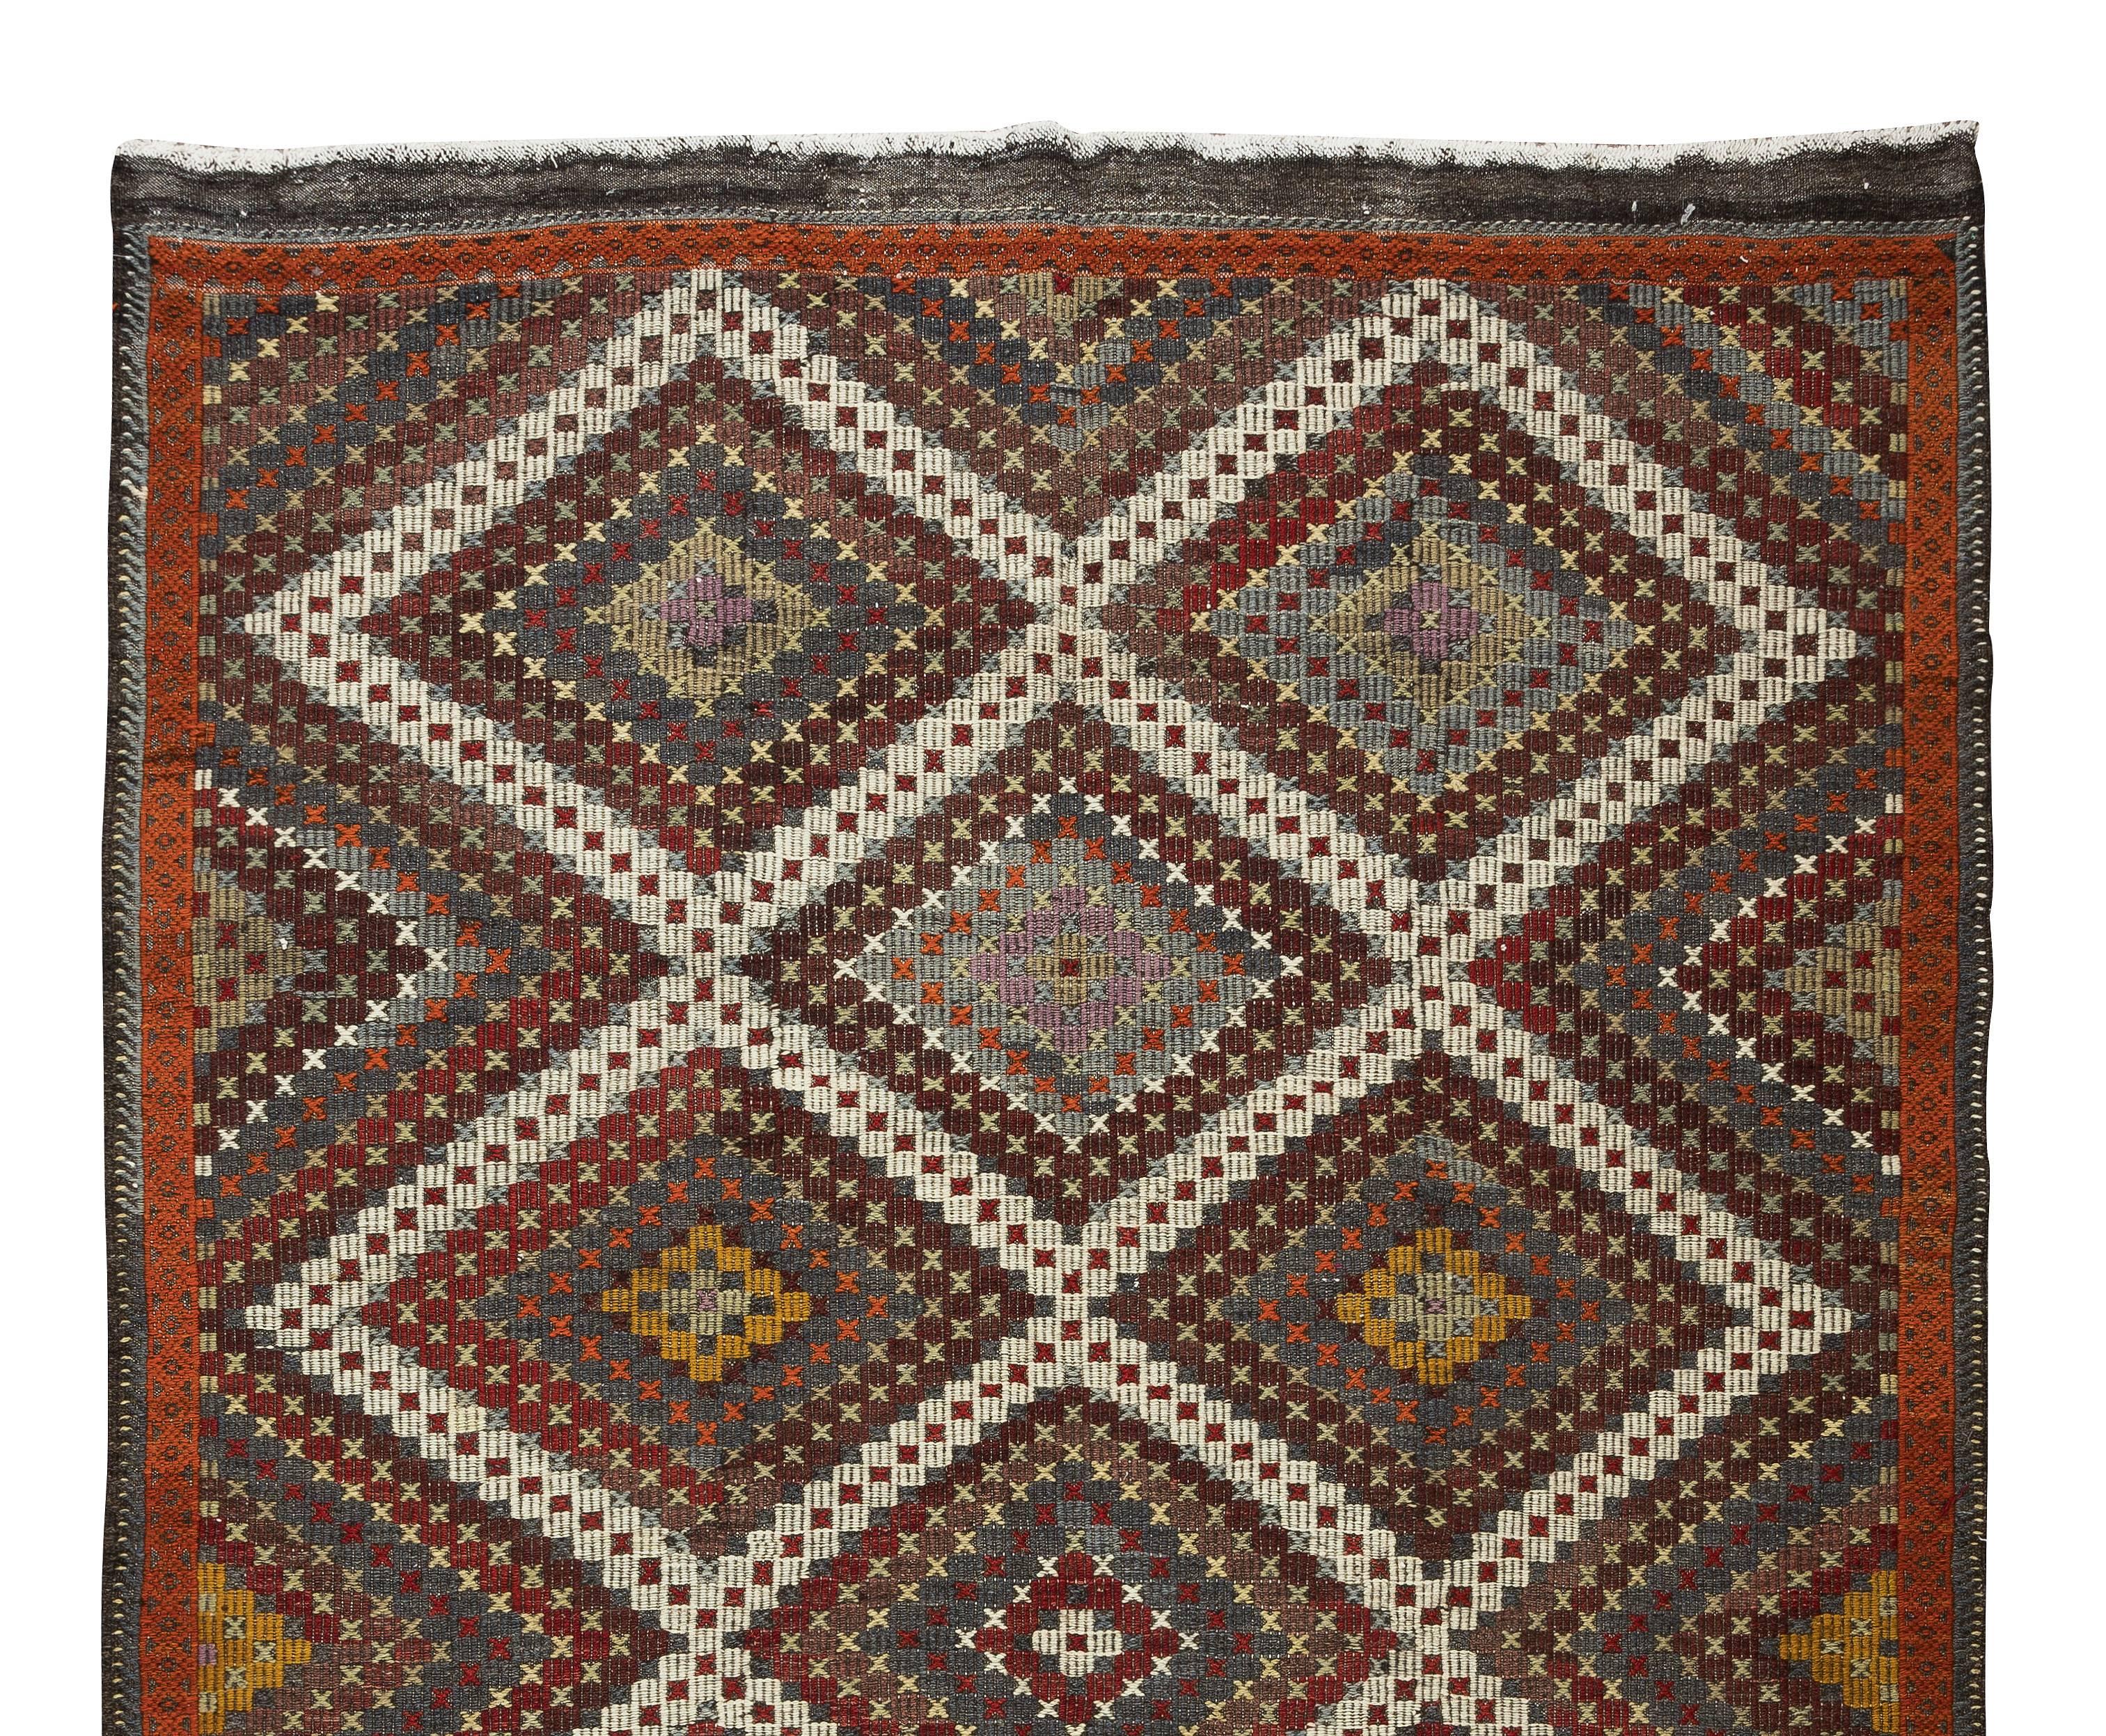 20th Century Vintage Turkish Jajim Kilim, One of a Kind Hand-Woven Rug Made of Wool For Sale